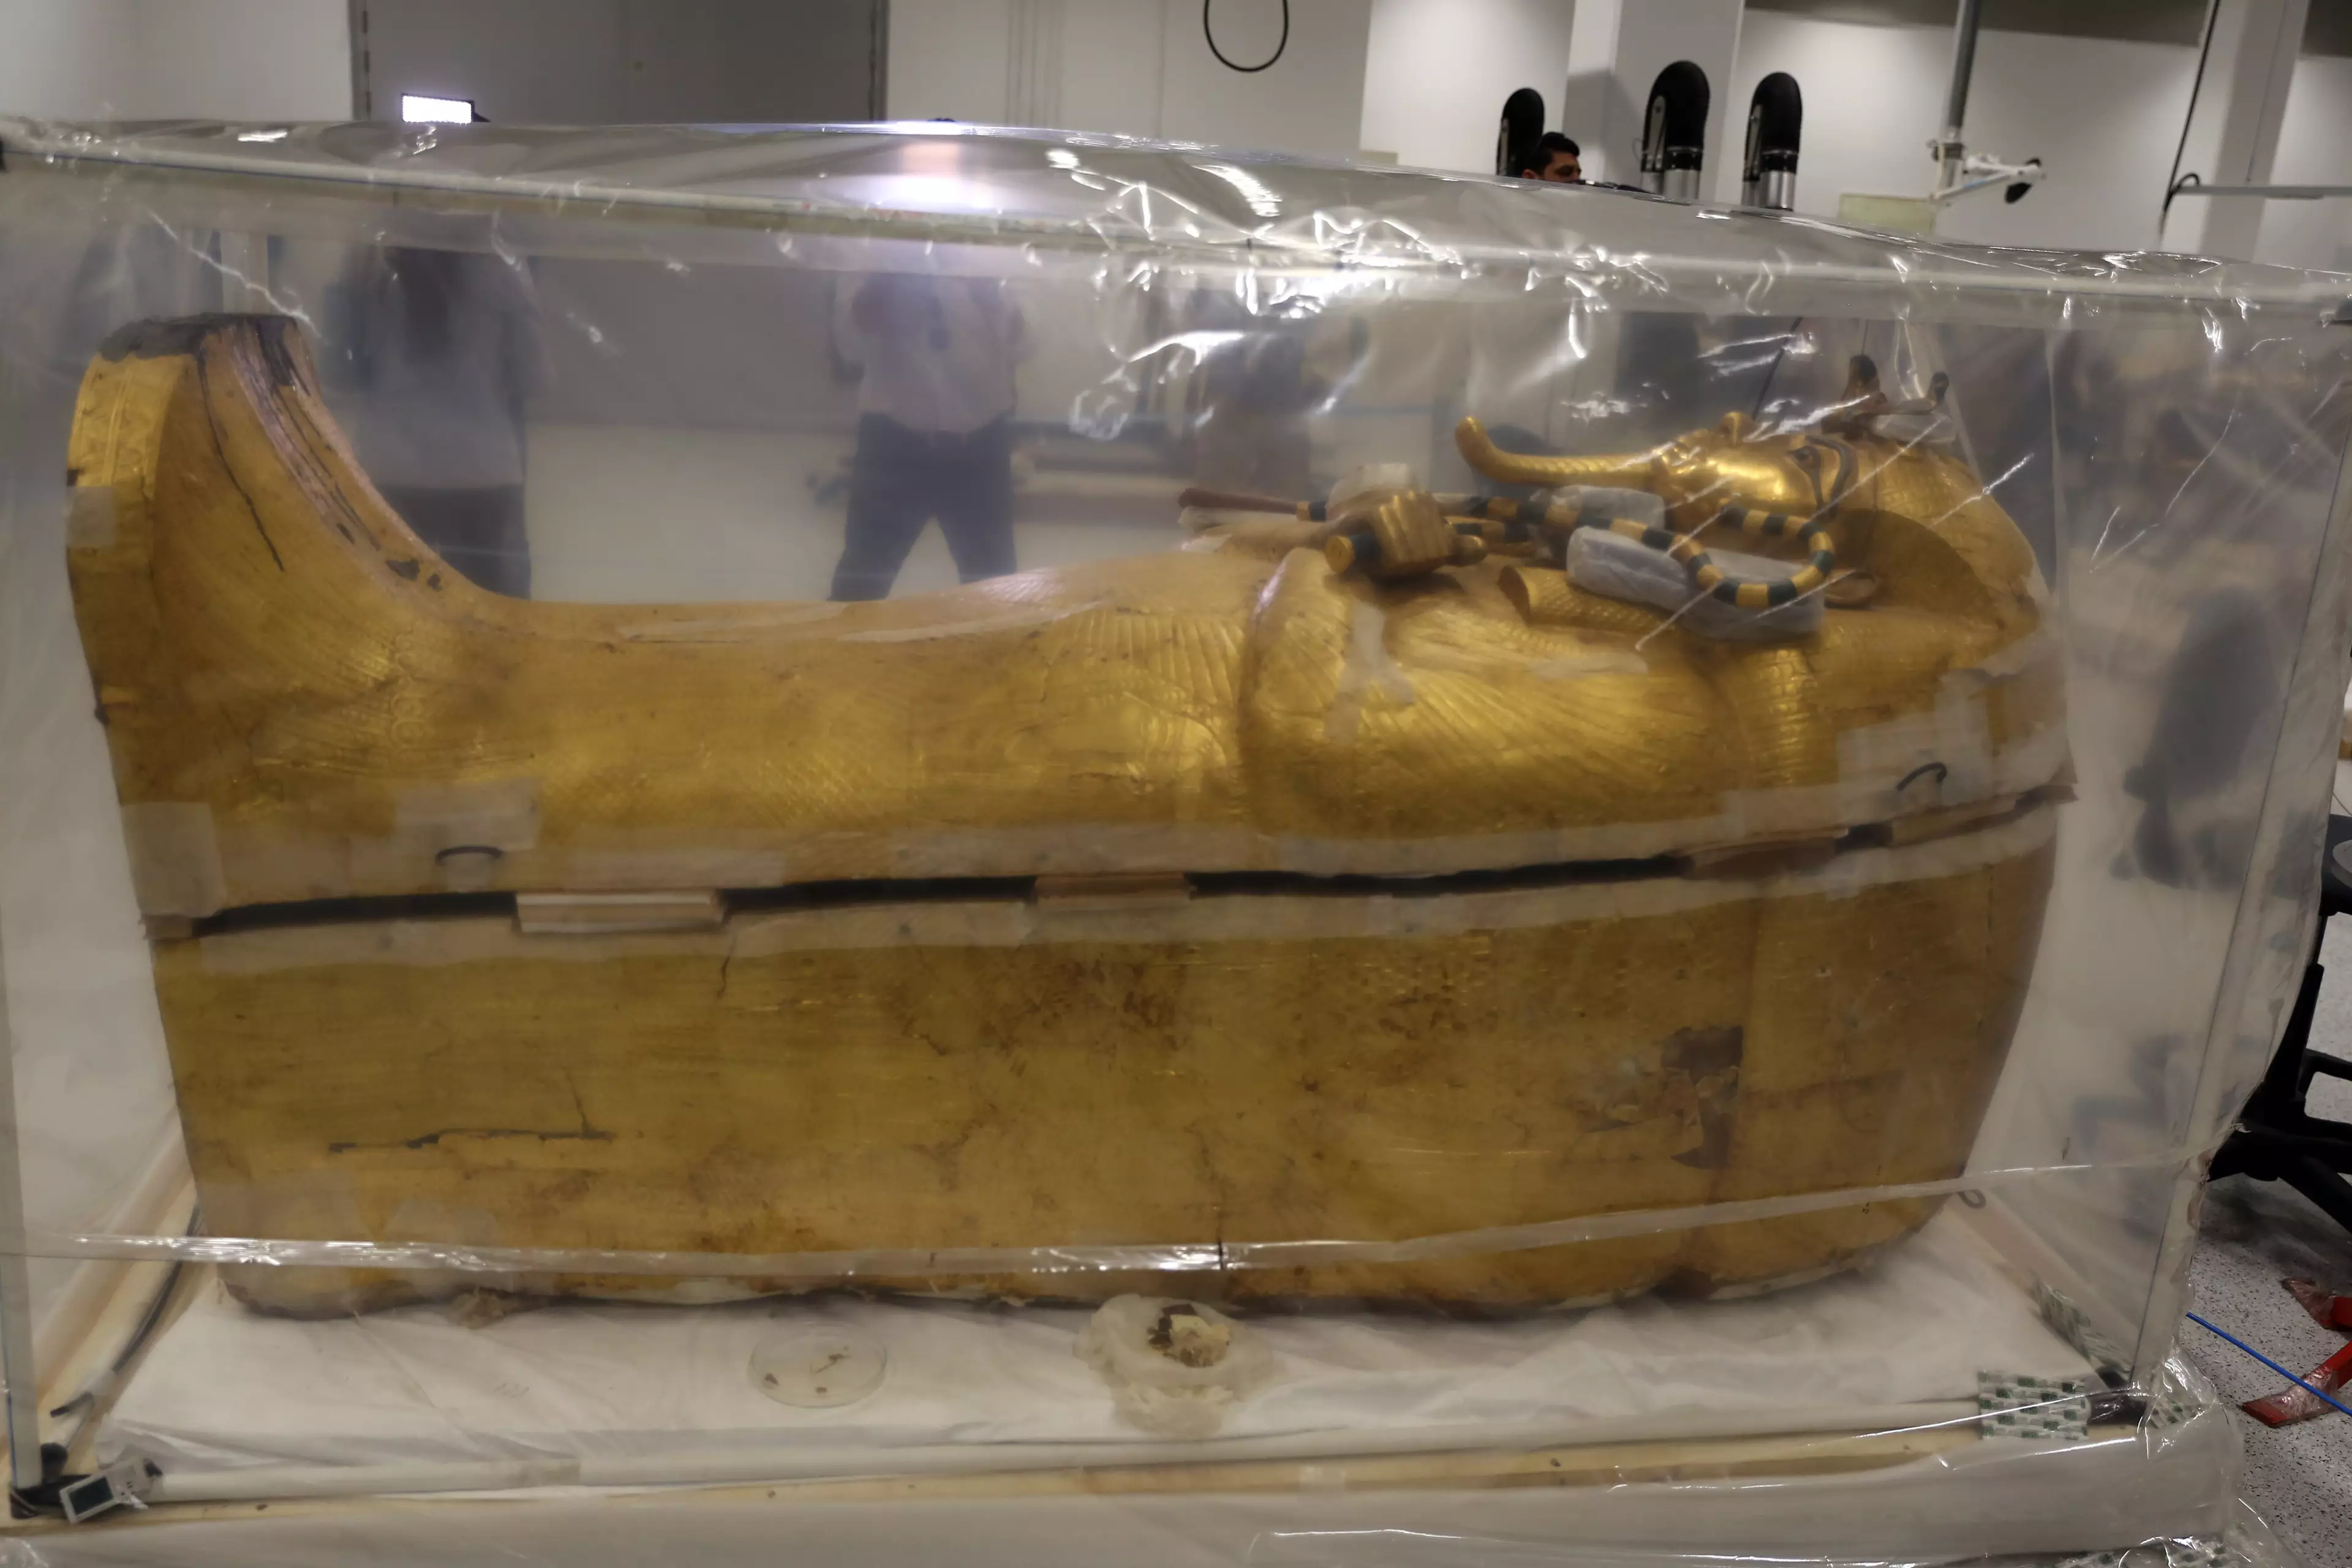 The sarcophagus was fumigated for a week.